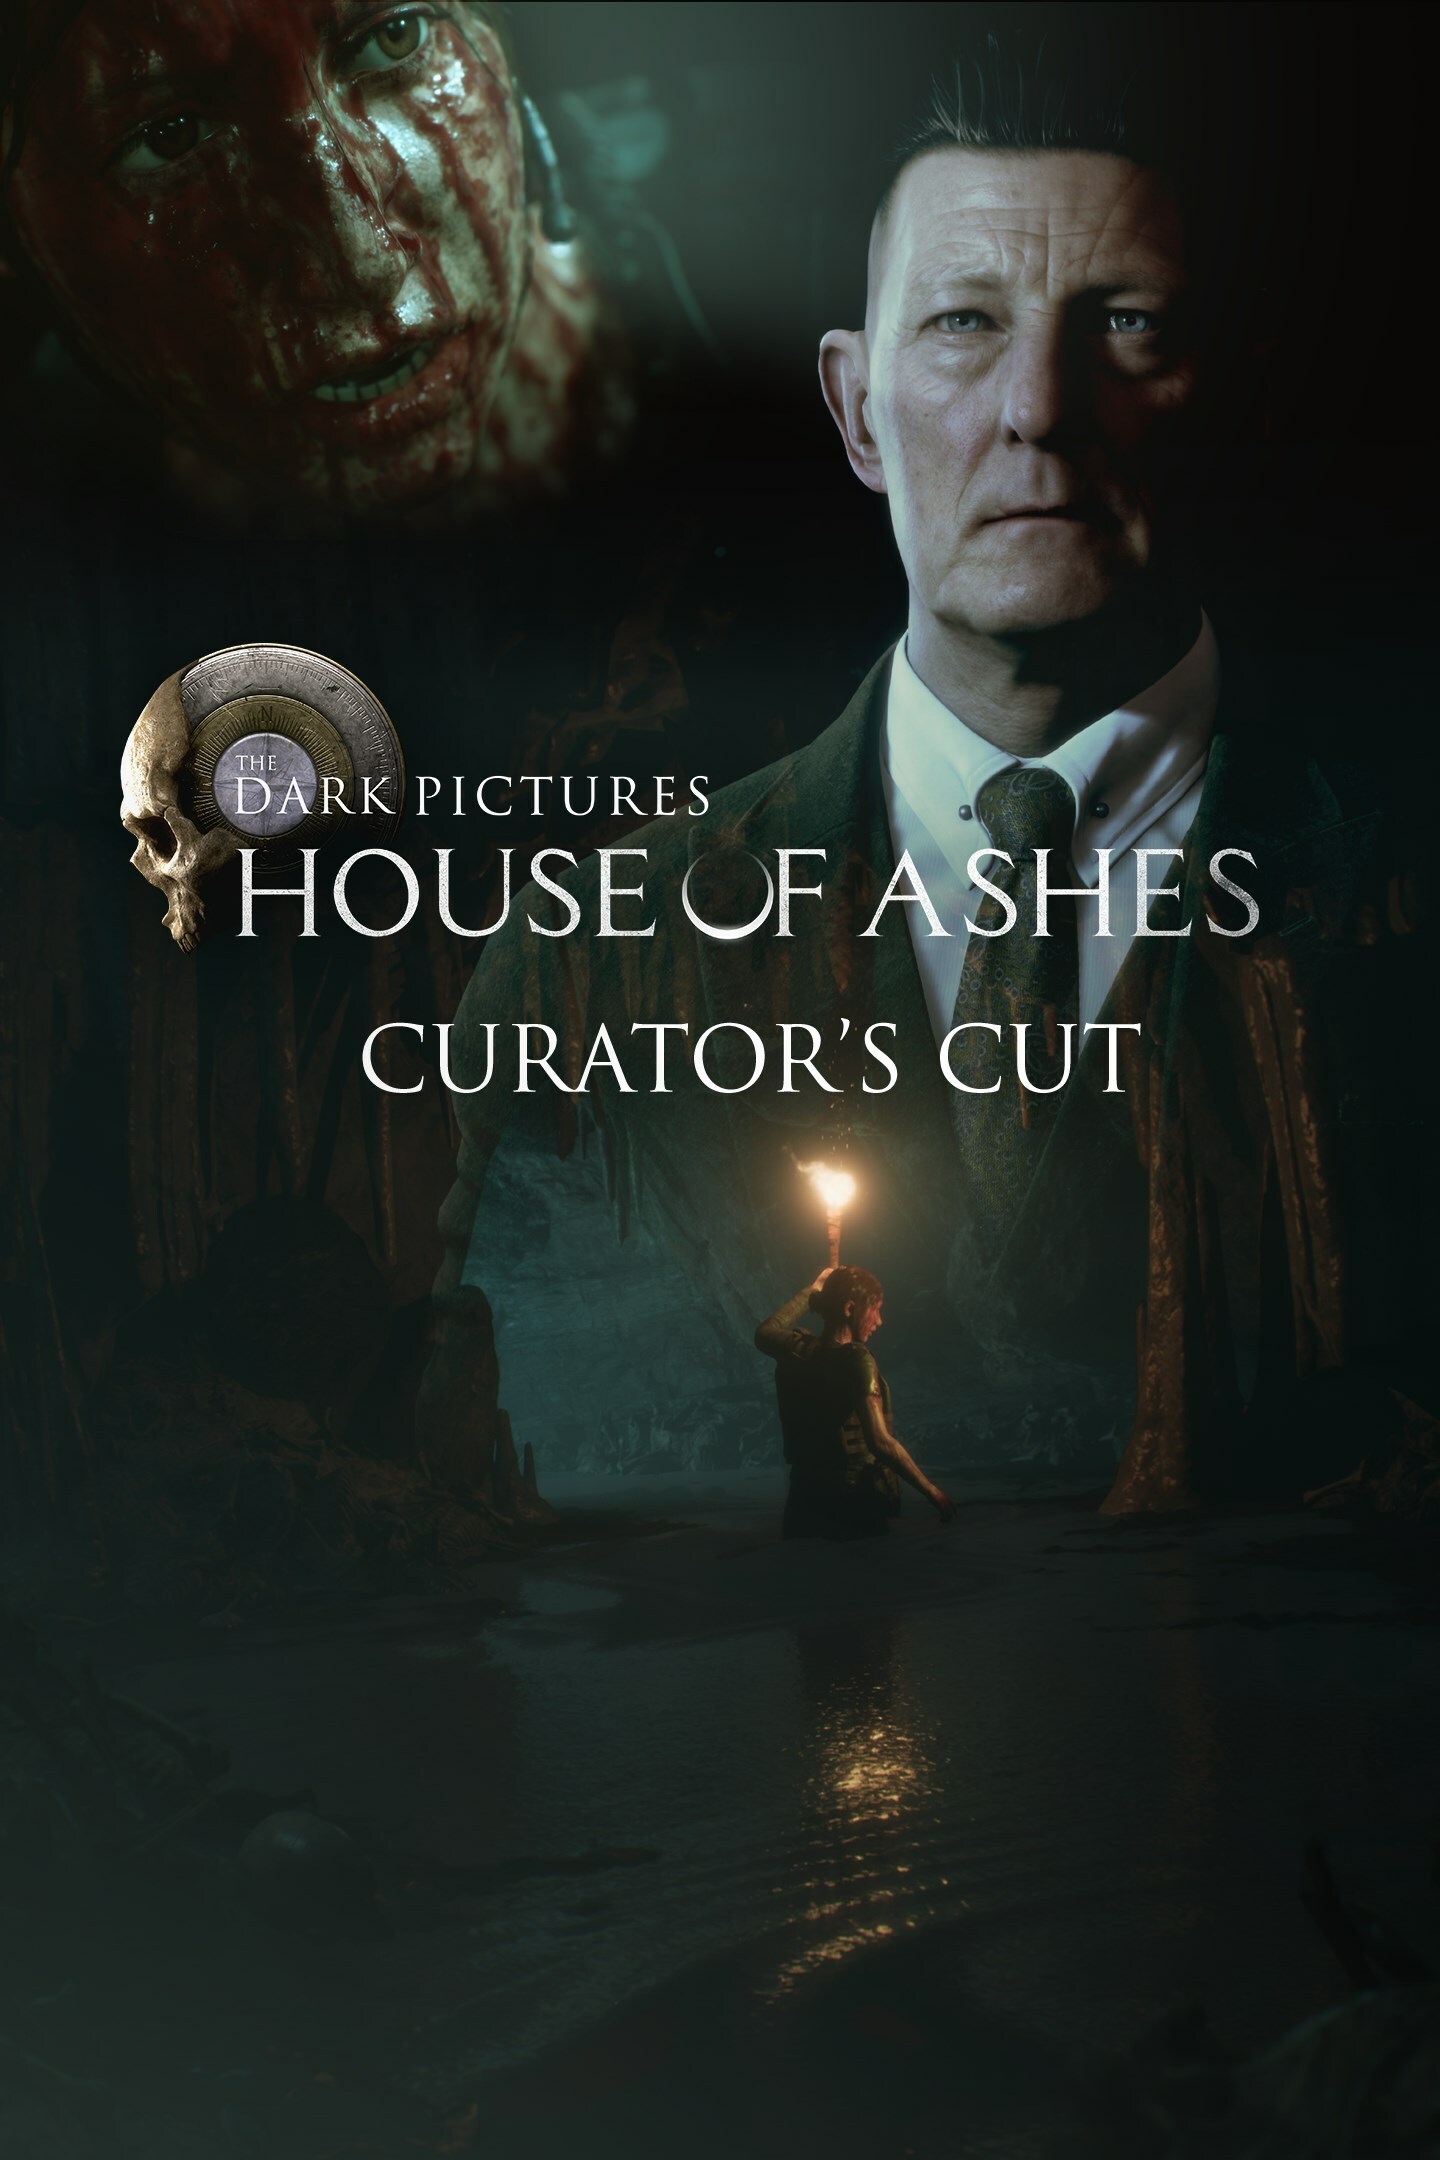 The Dark Pictures : House Of Ashes